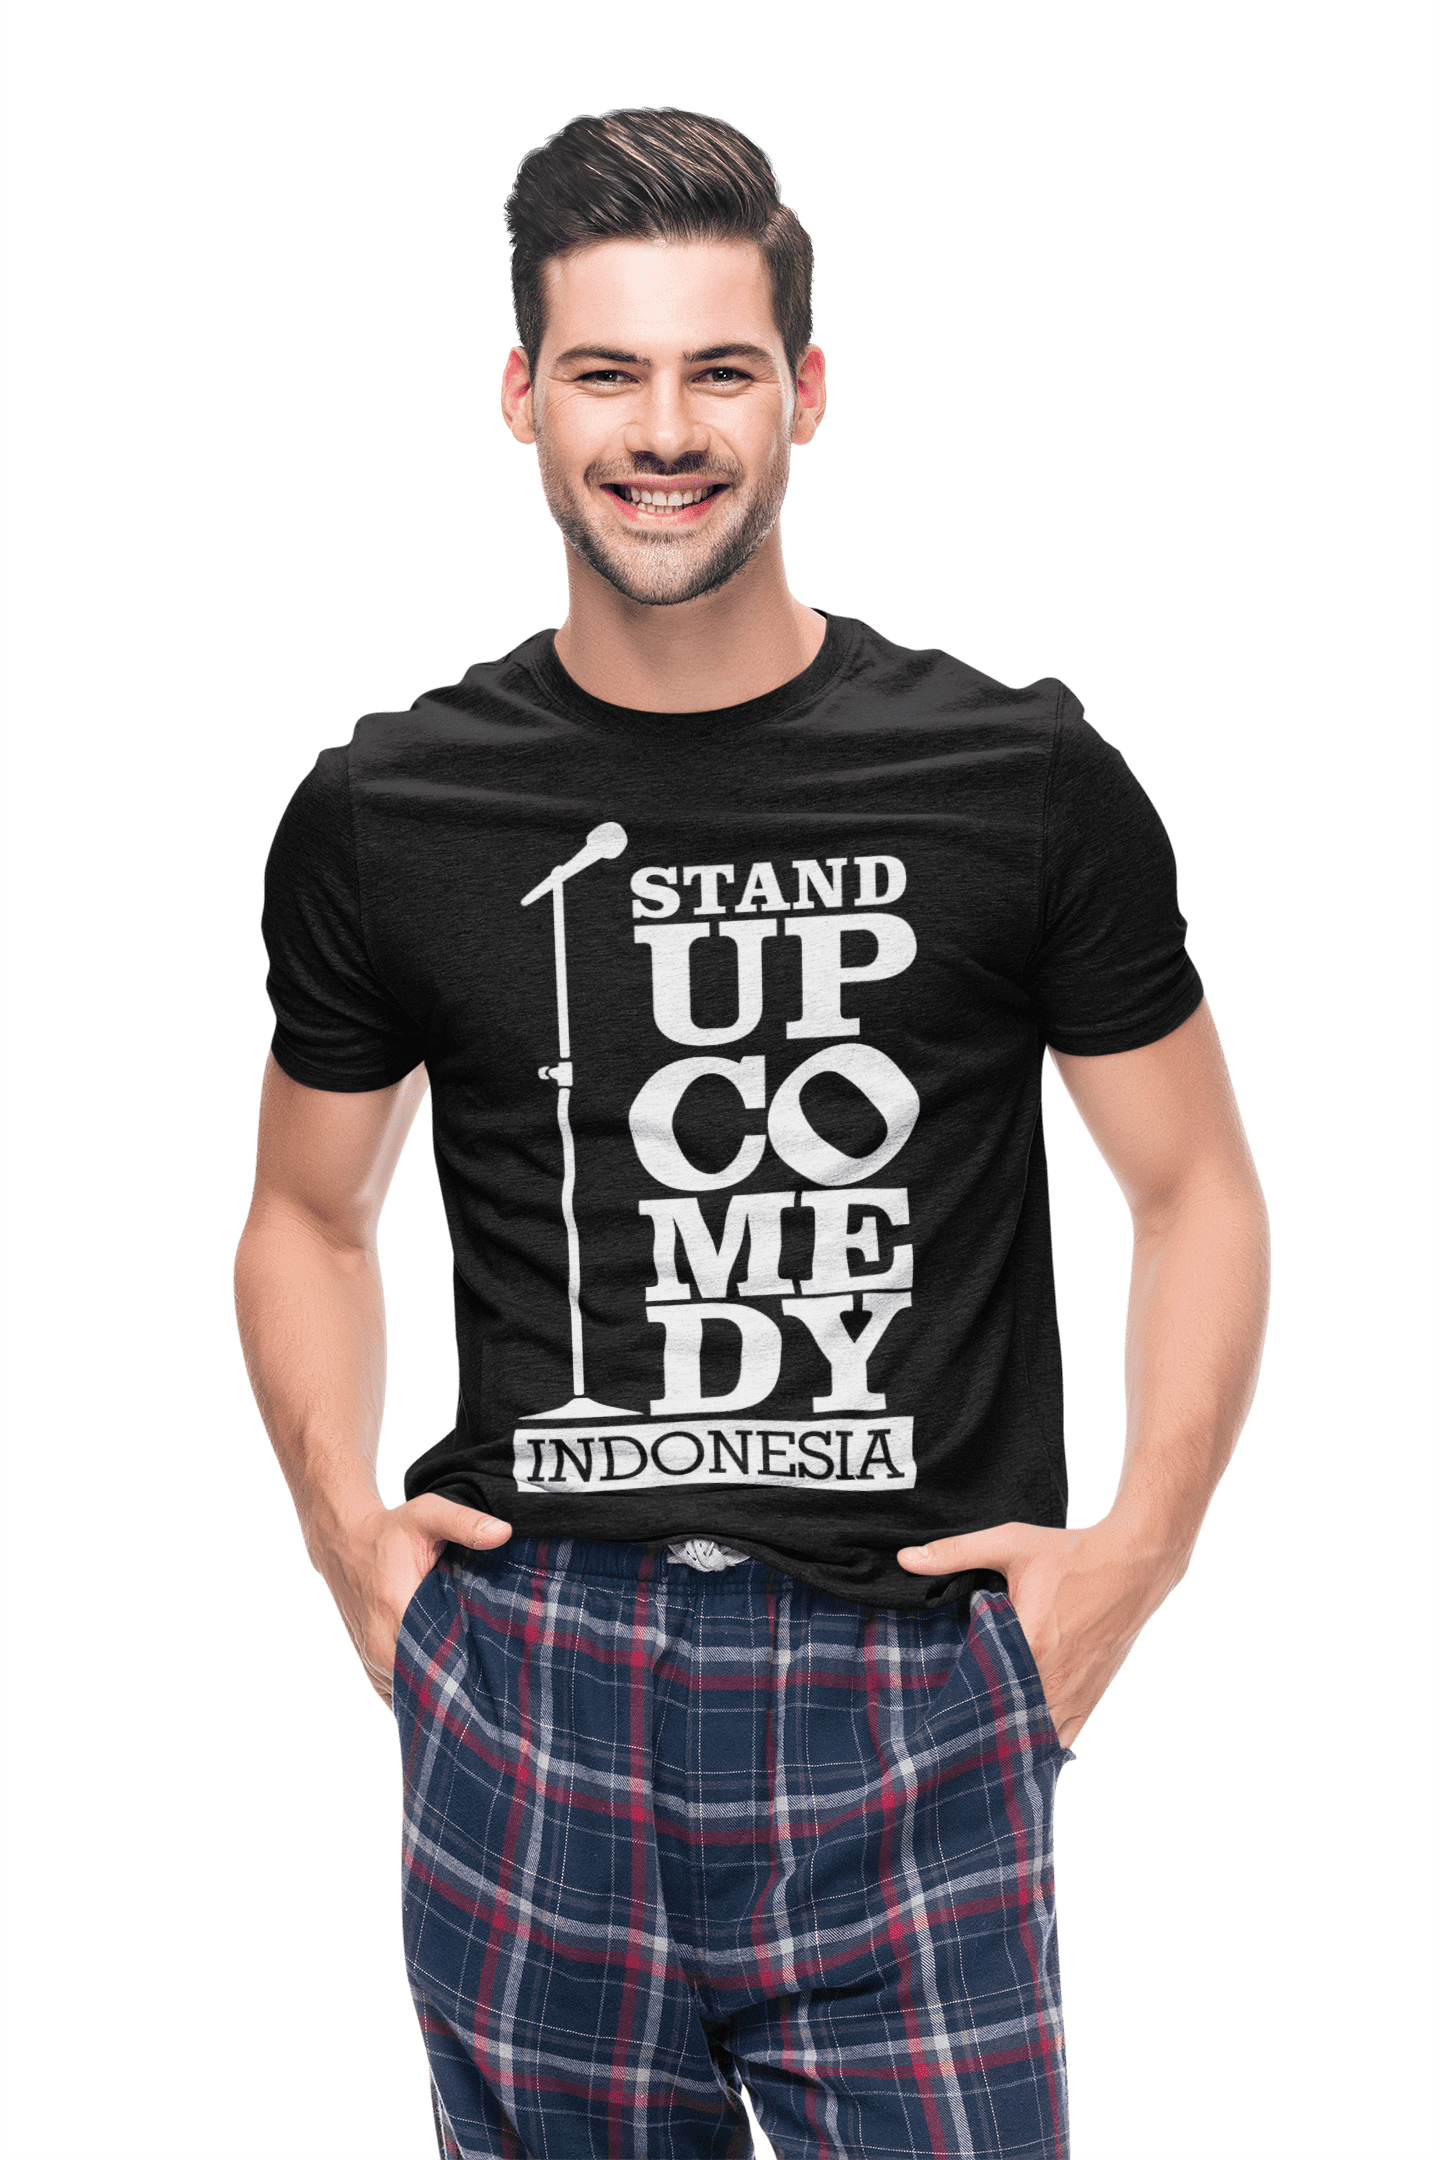 kaos stand up comedy indonesia